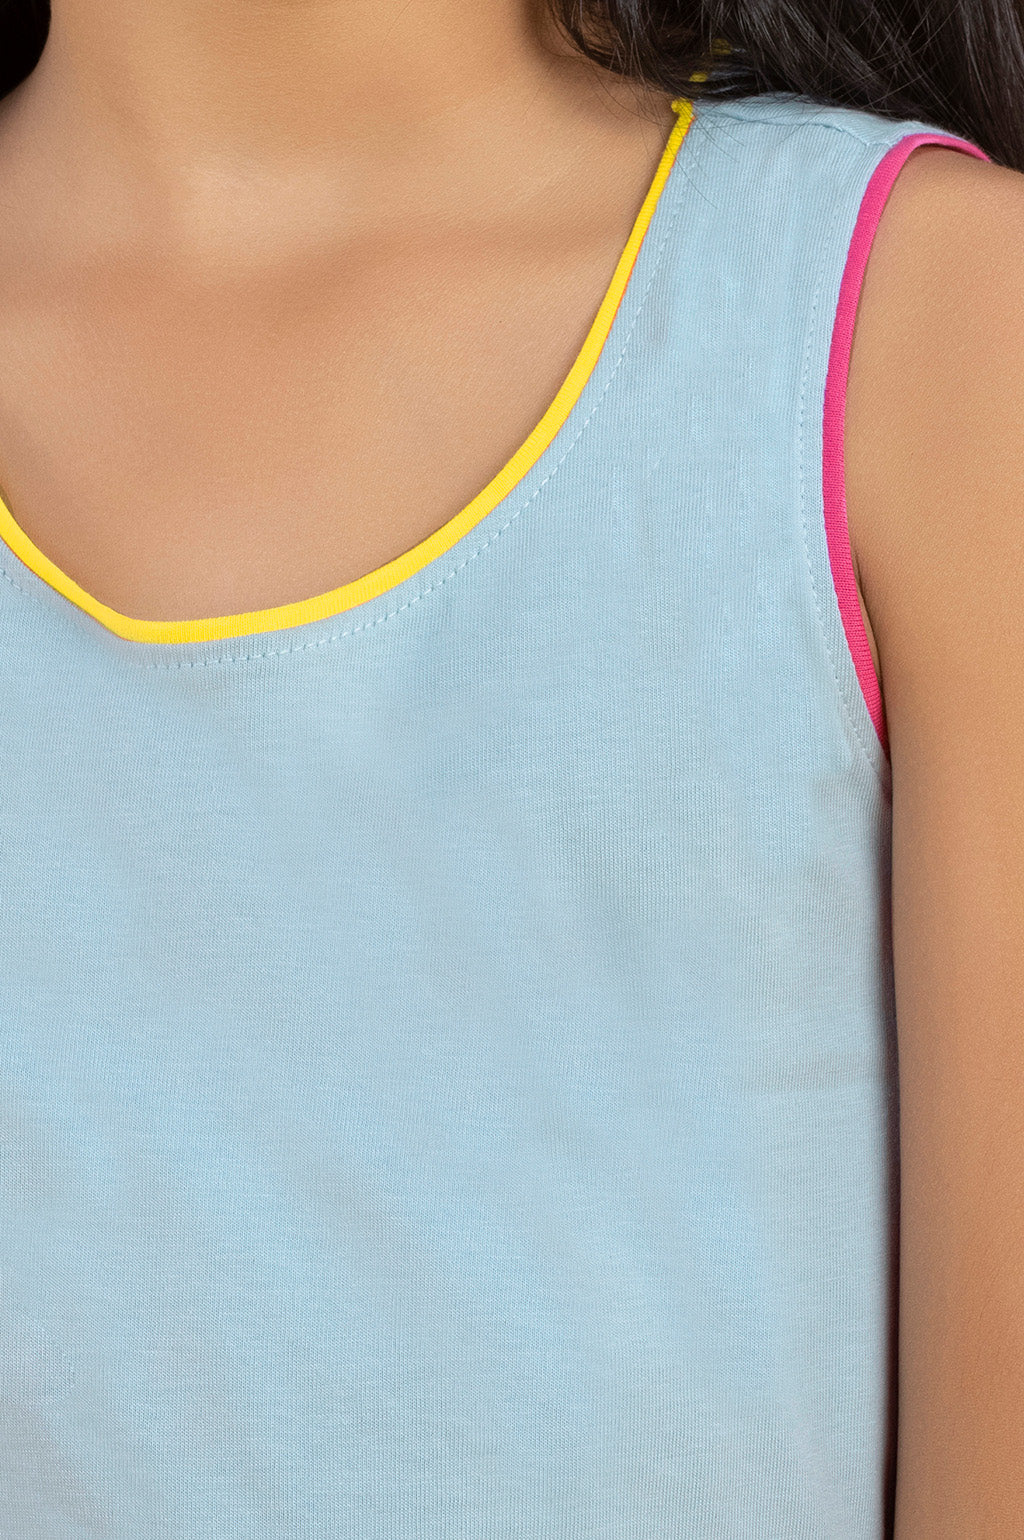 Girls tank top primary combed cotton blue - XYLife Kids Wear